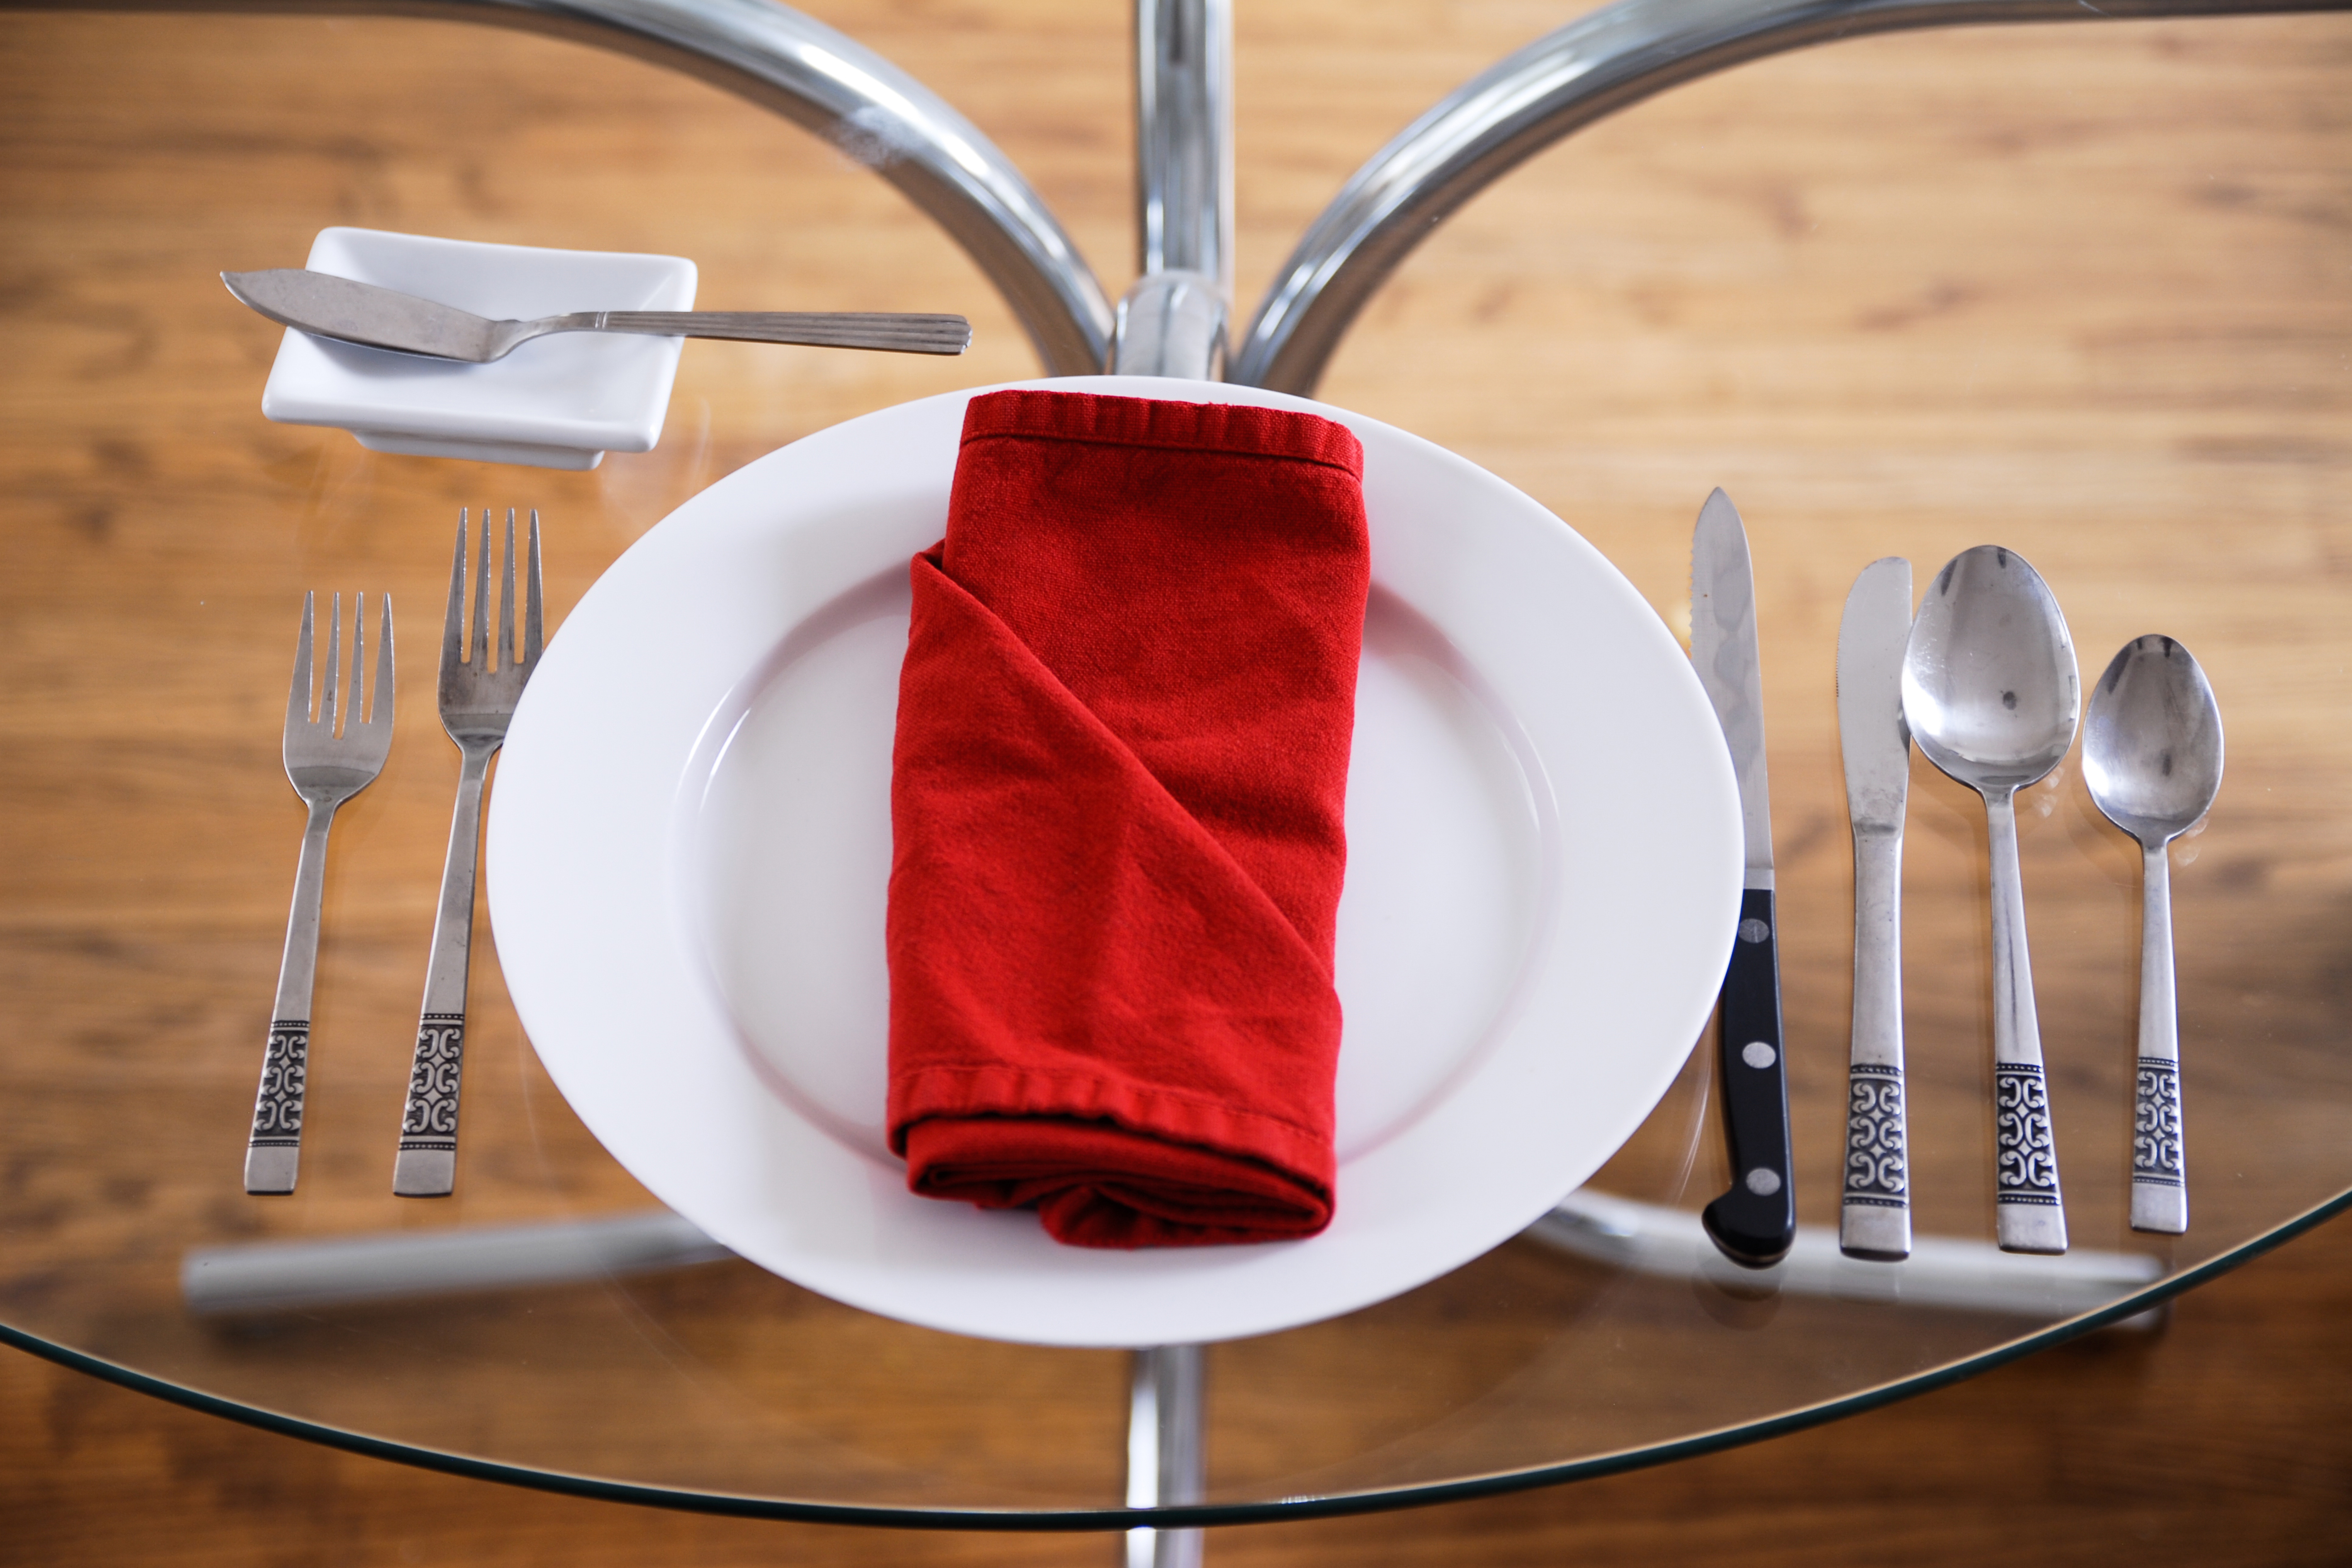 Correct Placement of Napkins and Utensils on a Table